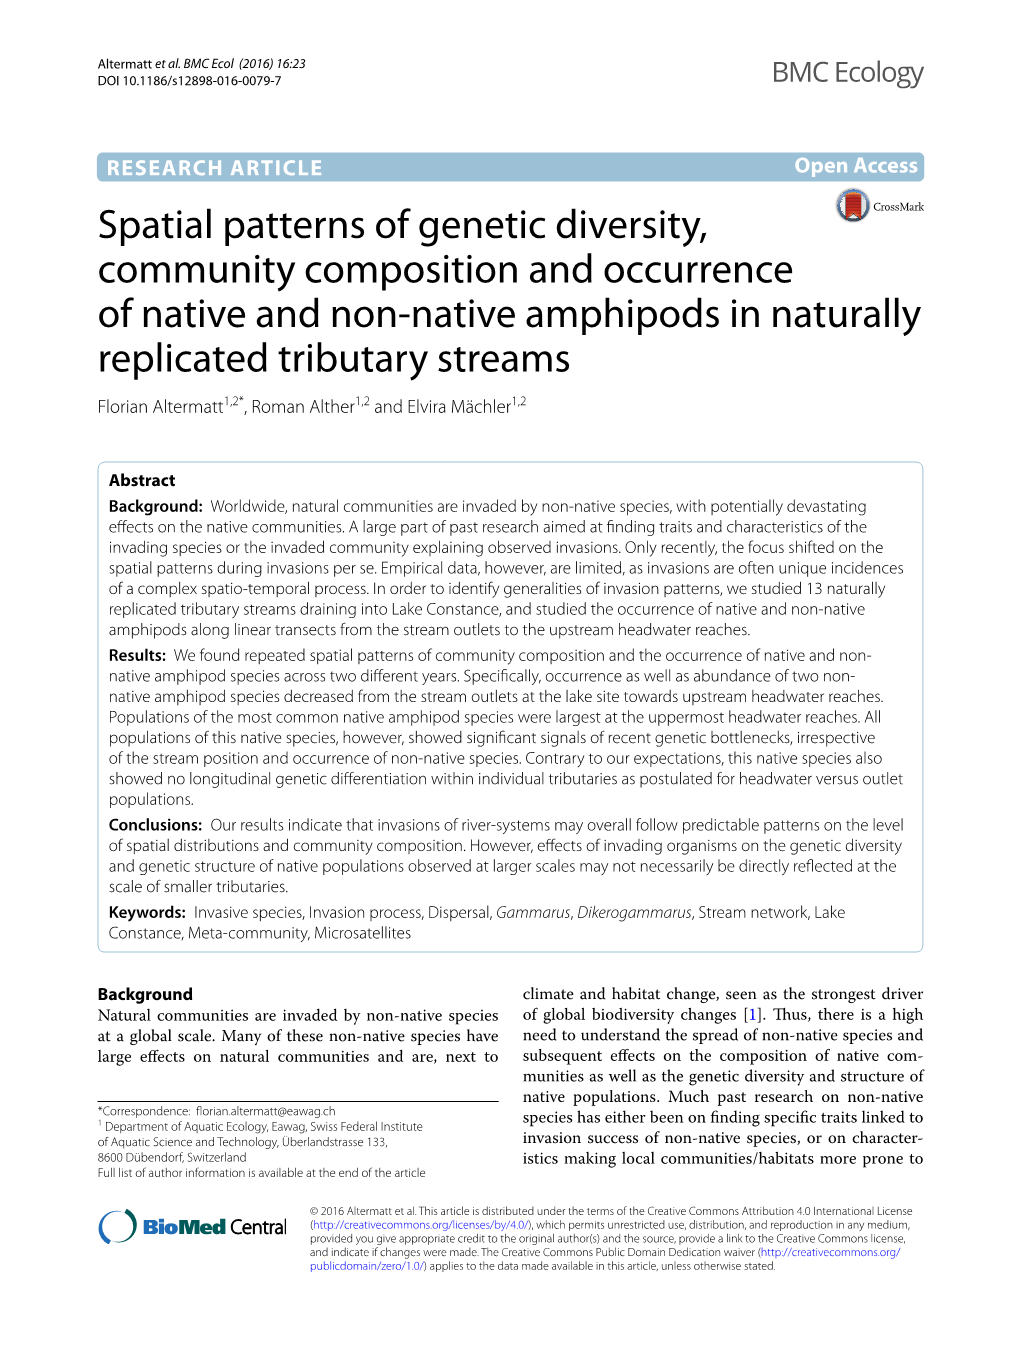 Spatial Patterns of Genetic Diversity, Community Composition And